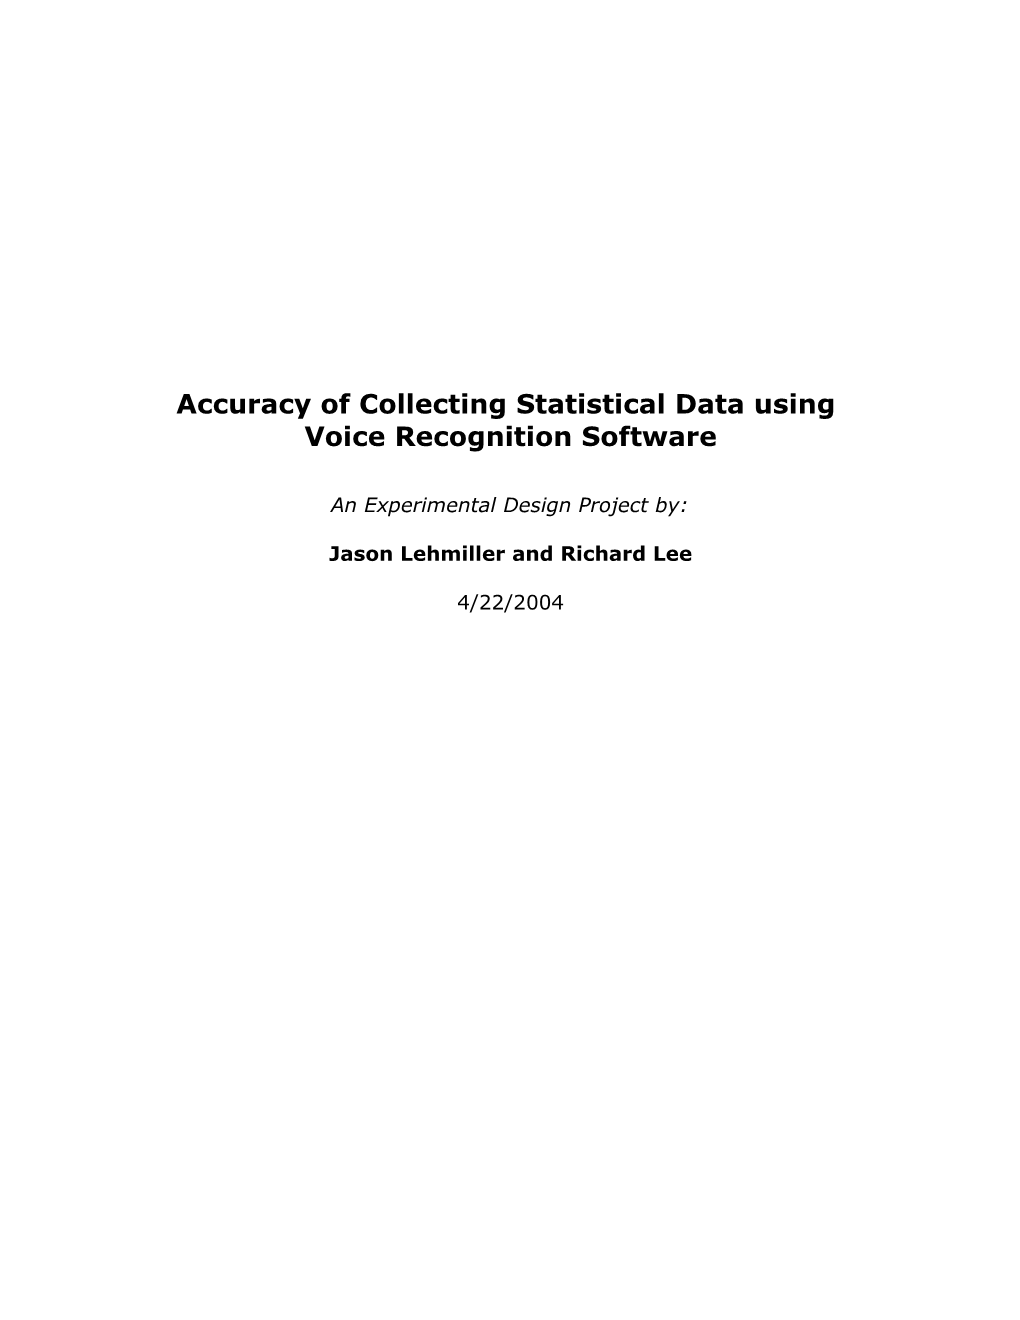 Accuracy of Collecting Statistical Data Using